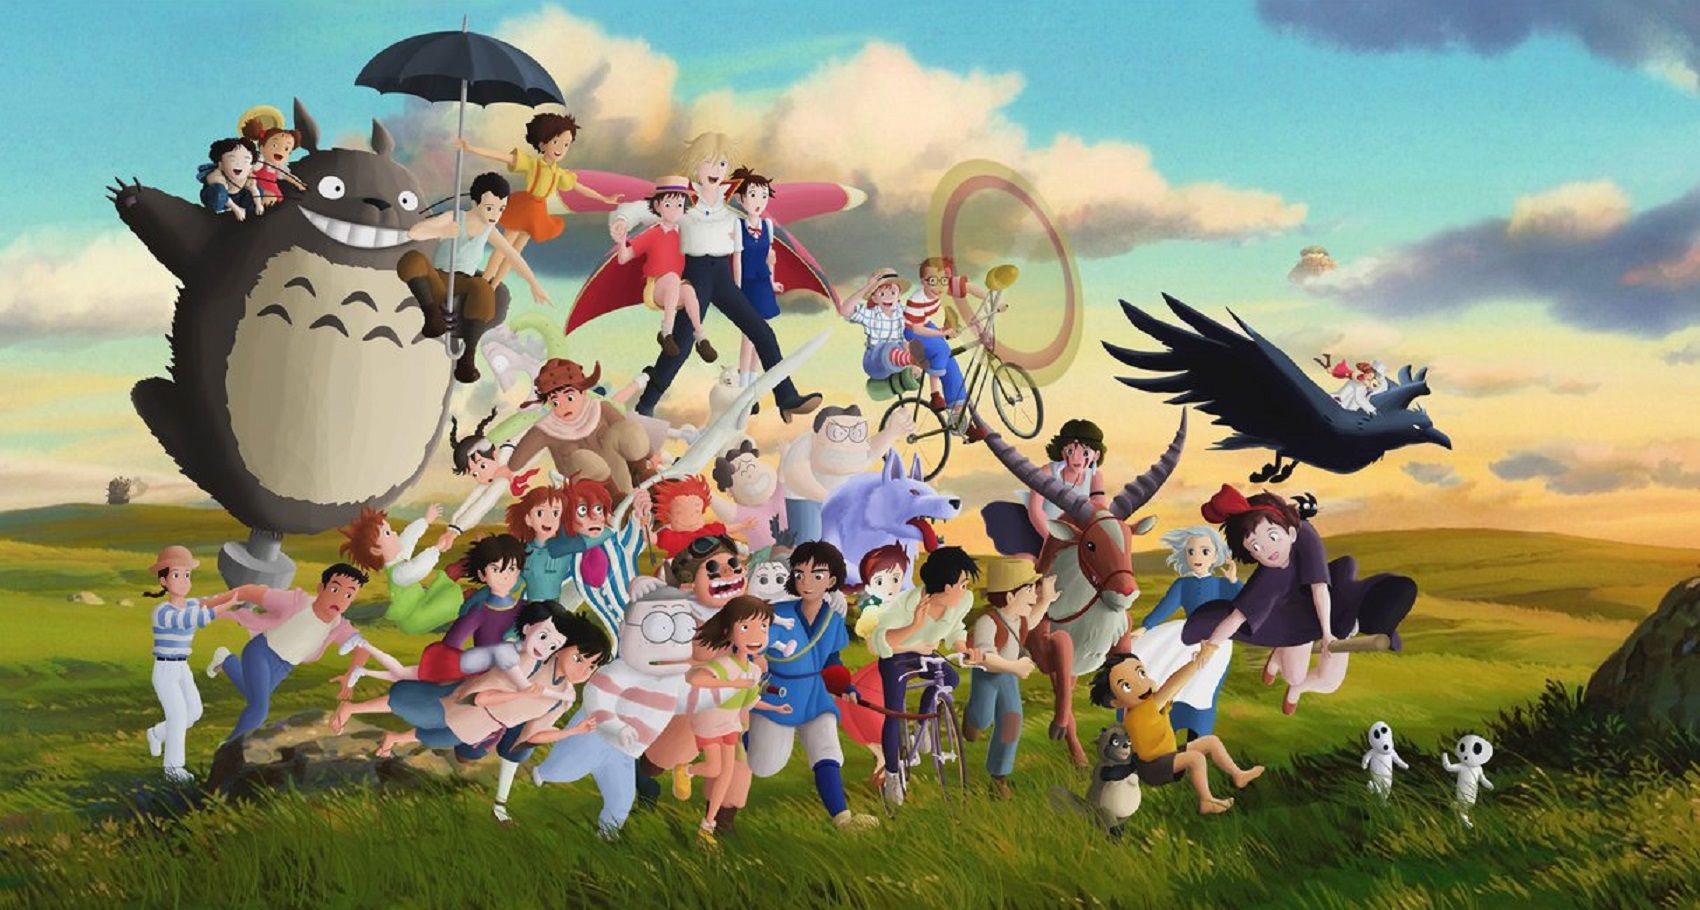 10 Things Even Die-hard Fans Don't Know About Studio Ghibli Films